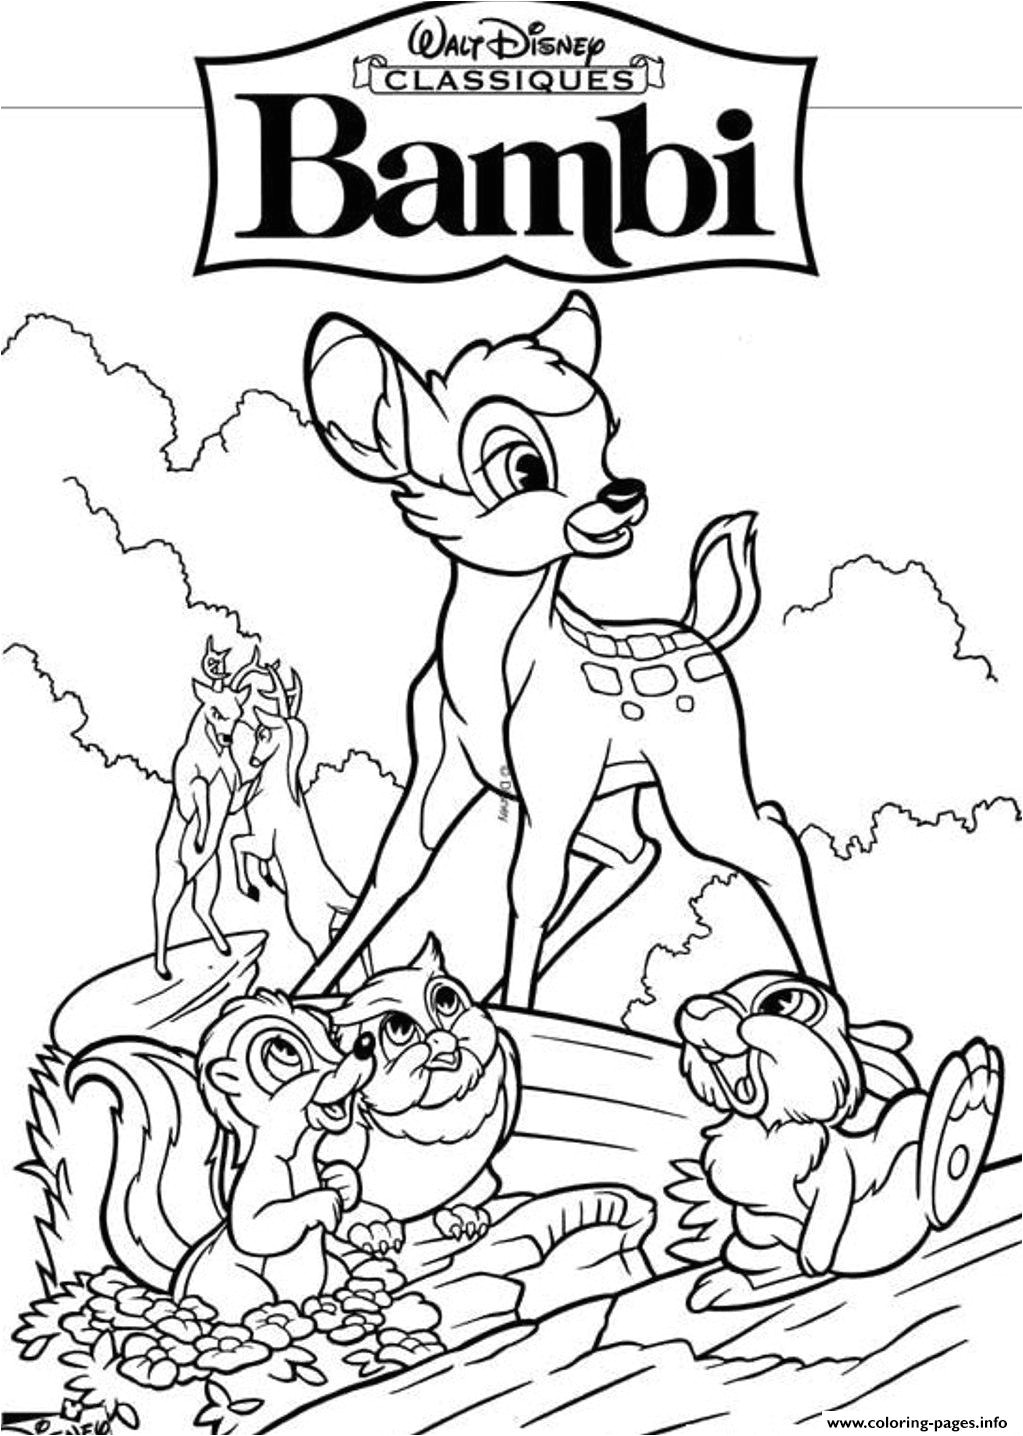 disney bambi 7549 printable coloring pages book 4129